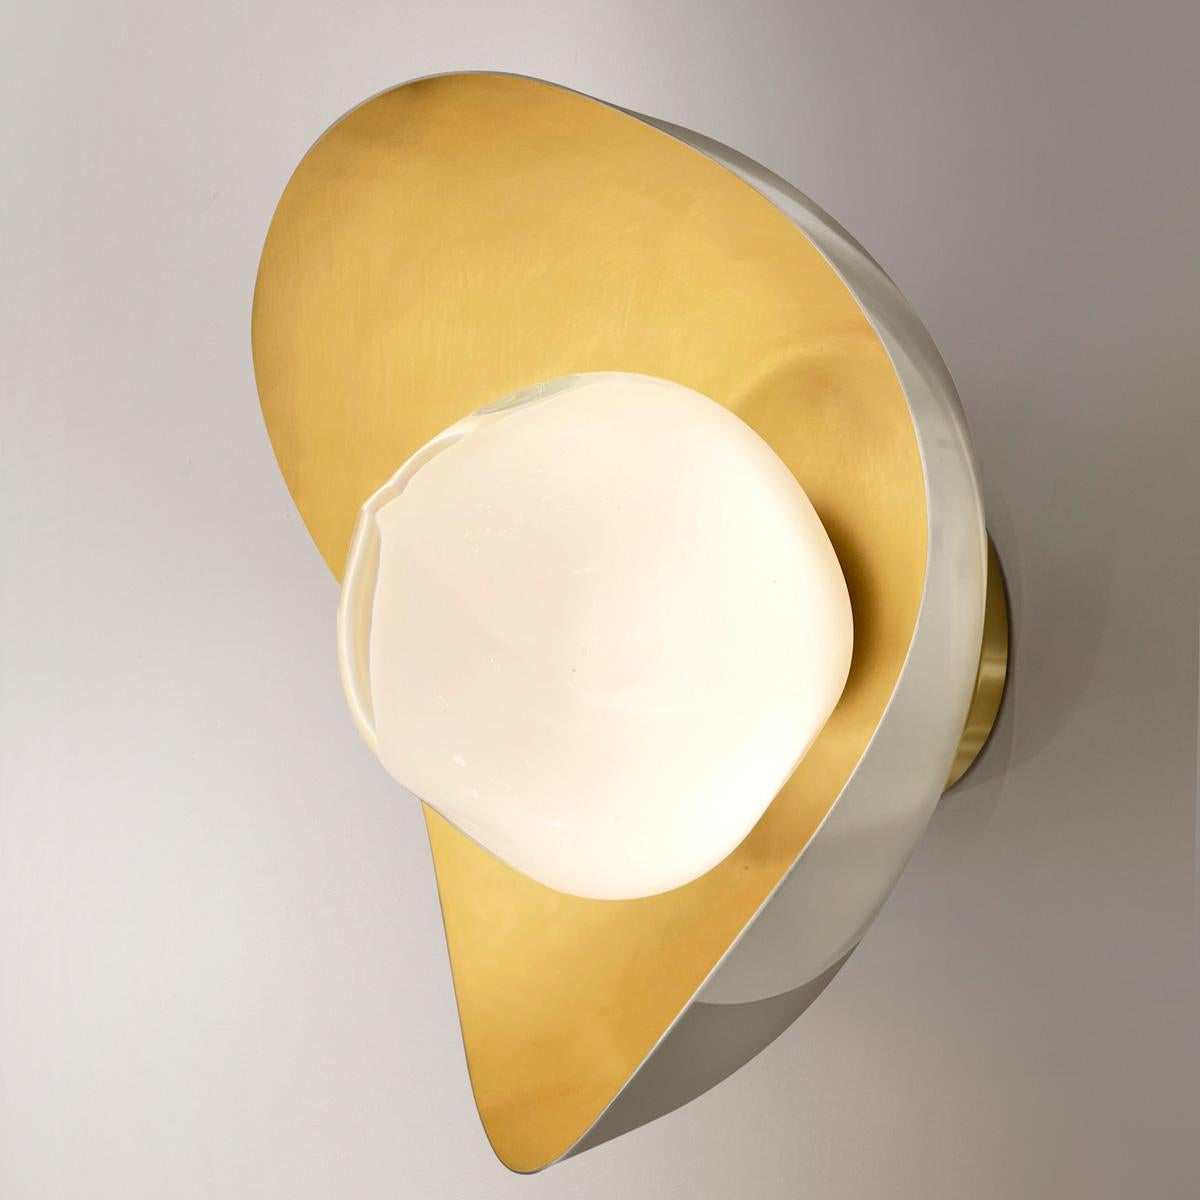 Modern Perla Wall Light by Gaspare Asaro-Satin Brass/Polished Nickel Finish For Sale